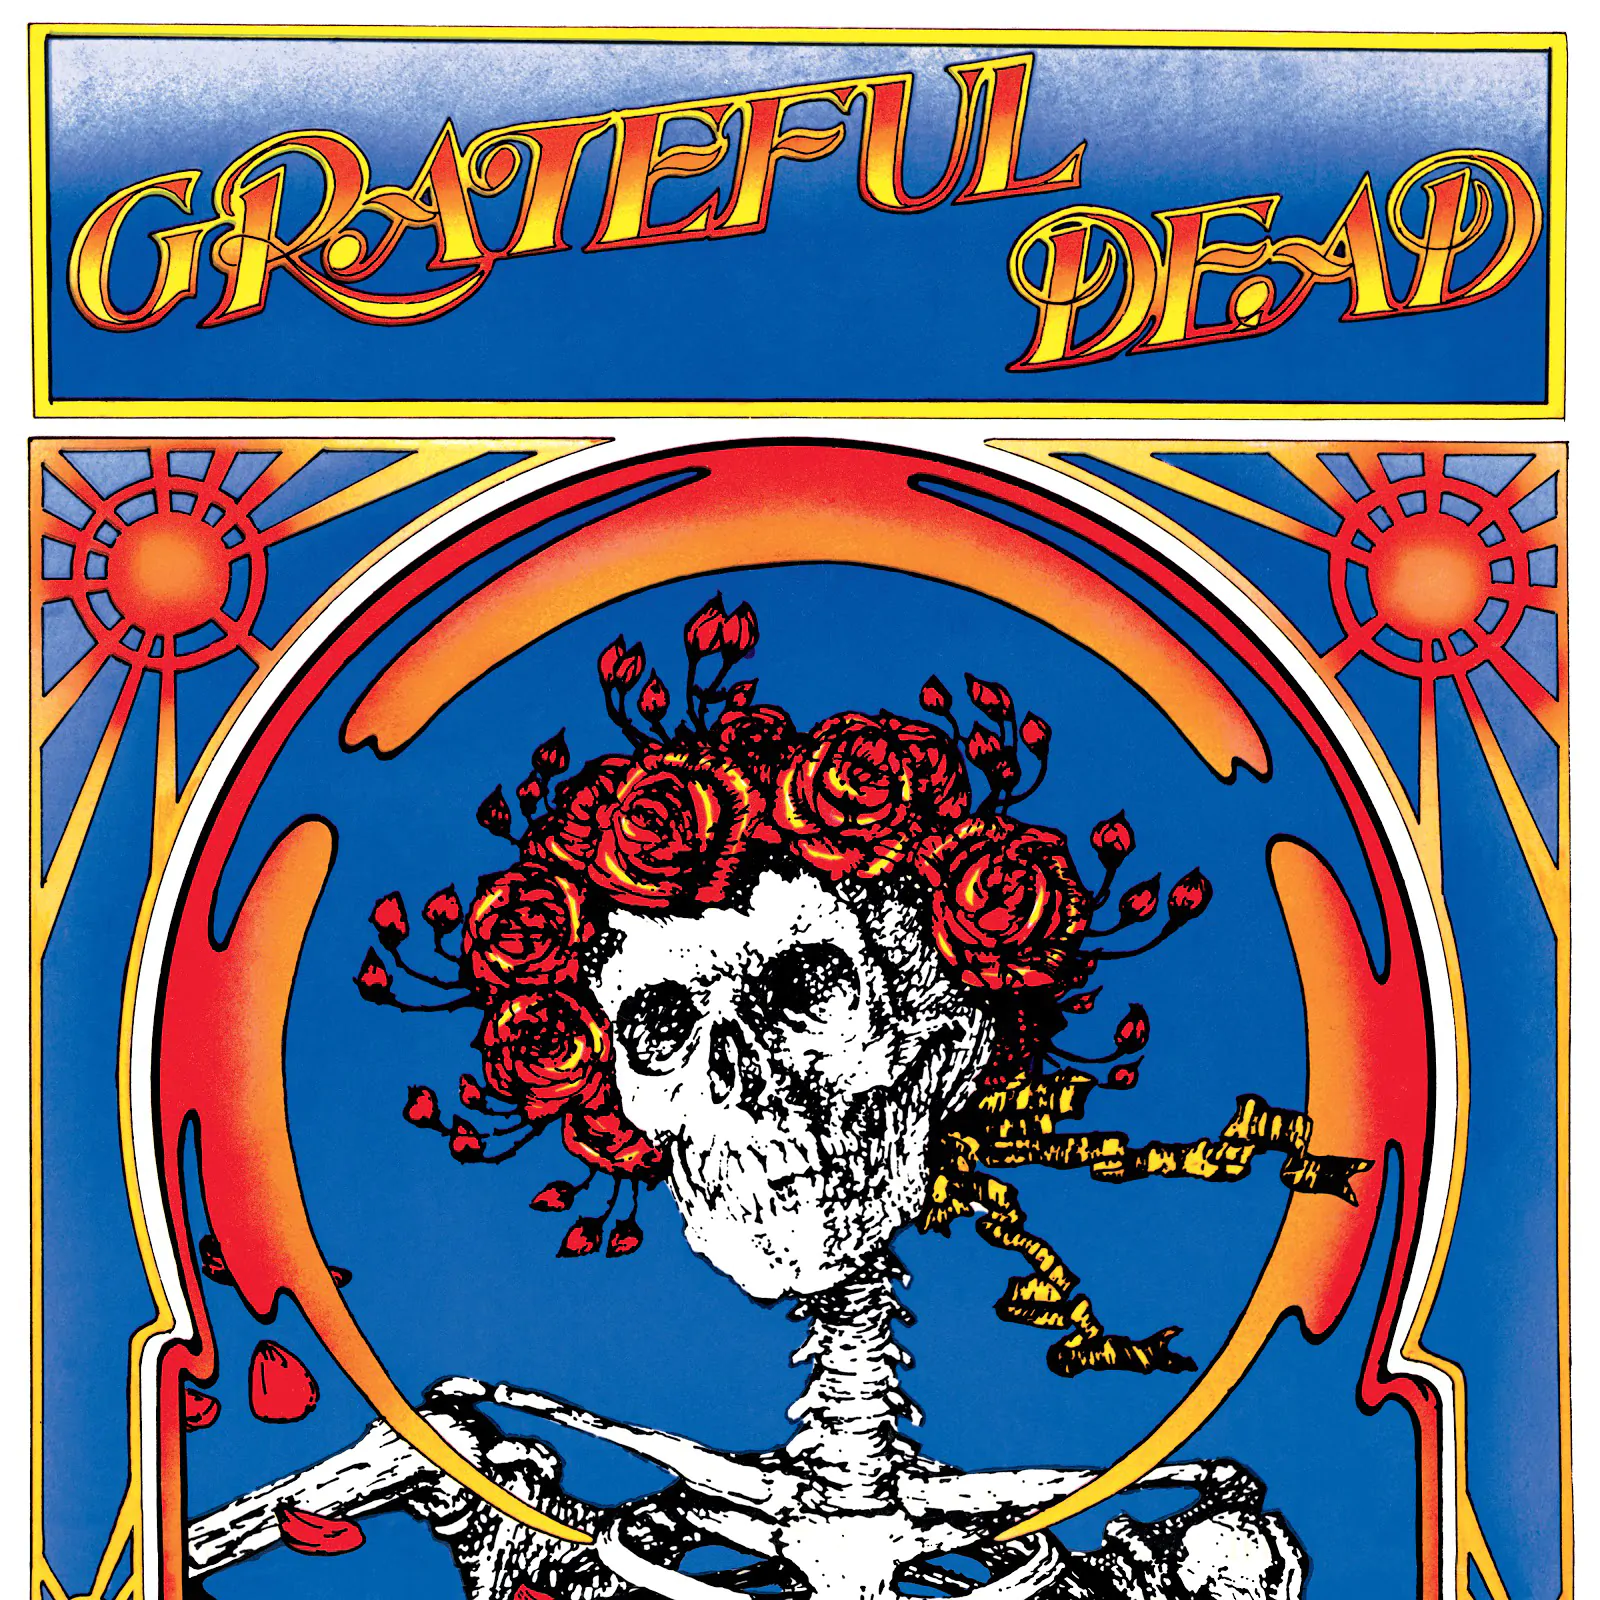 GRATEFUL DEAD announce ‘Skull & Roses’ 50th anniversary expanded editions